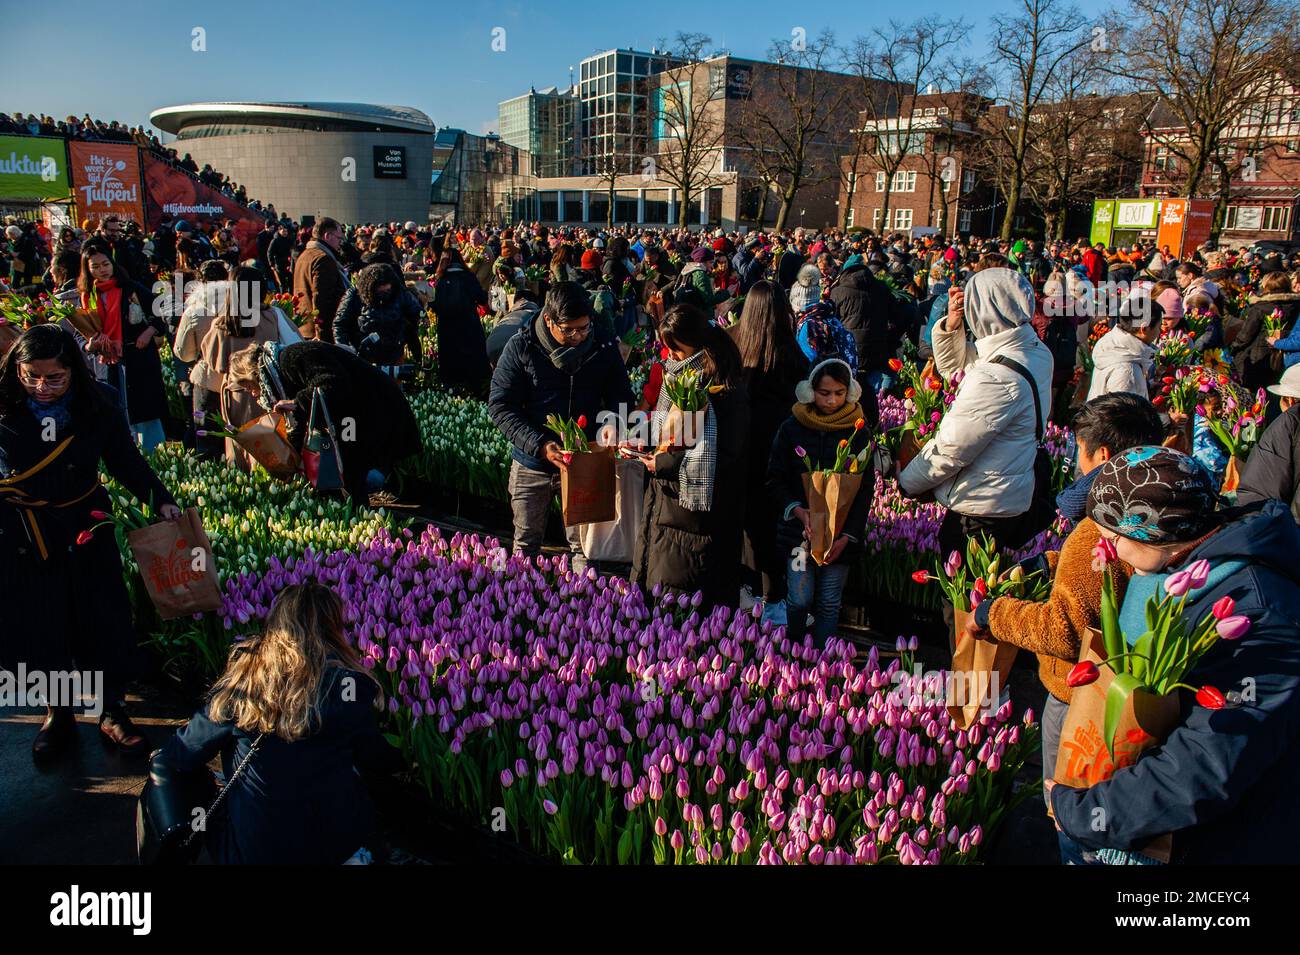 General view of the people having a great time while taking tulips for free. Each year on the 3rd Saturday of January, the National Tulip Day is celebrated in Amsterdam. Dutch tulip growers built a huge picking garden with more than 200,000 colorful tulips at the Museumplein in Amsterdam. Visitors are allowed to pick tulips for free. The event was opened by Olympic skating champion, Irene Schouten. Prior to the opening, she christened a new tulip: Tulipa 'Dutch Pearl' as a reference to the world - famous painting 'The girl with a pearl earring' by Johannes Vermeer. (Photo by Ana Fernandez/SO Stock Photo